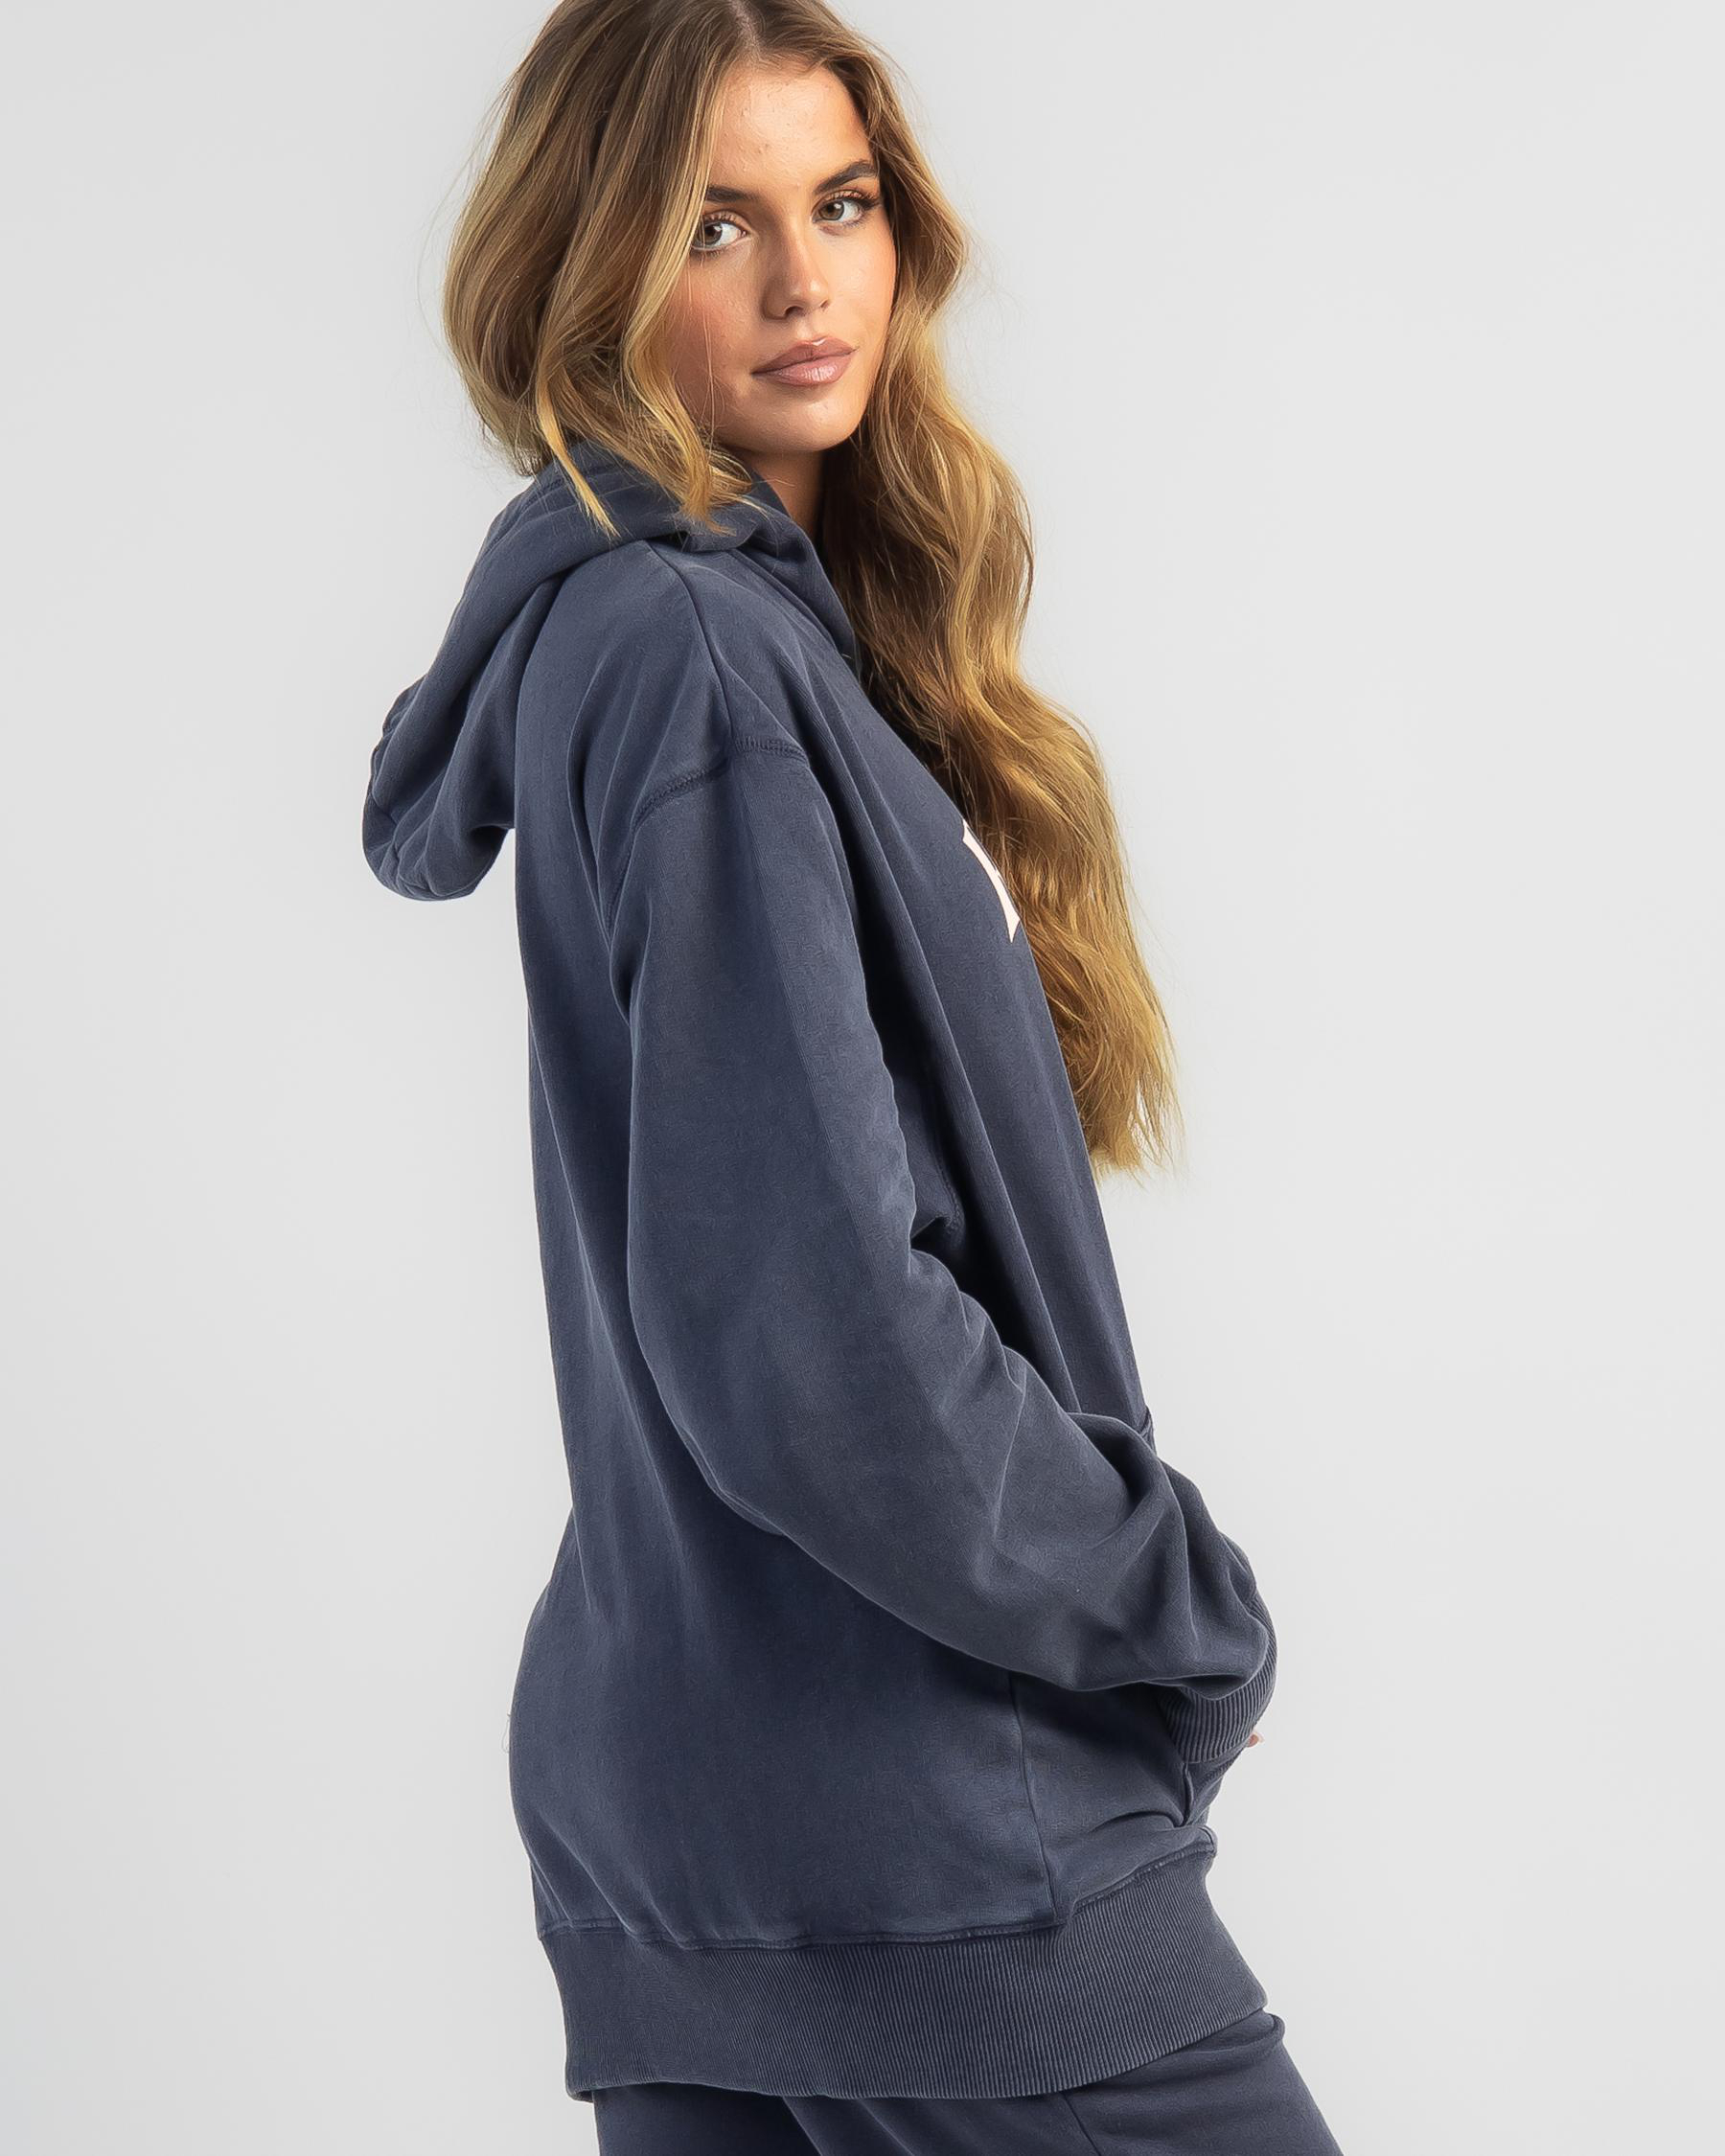 Roxy Take Another Look Hoodie In Mood Indigo - Fast Shipping & Easy ...